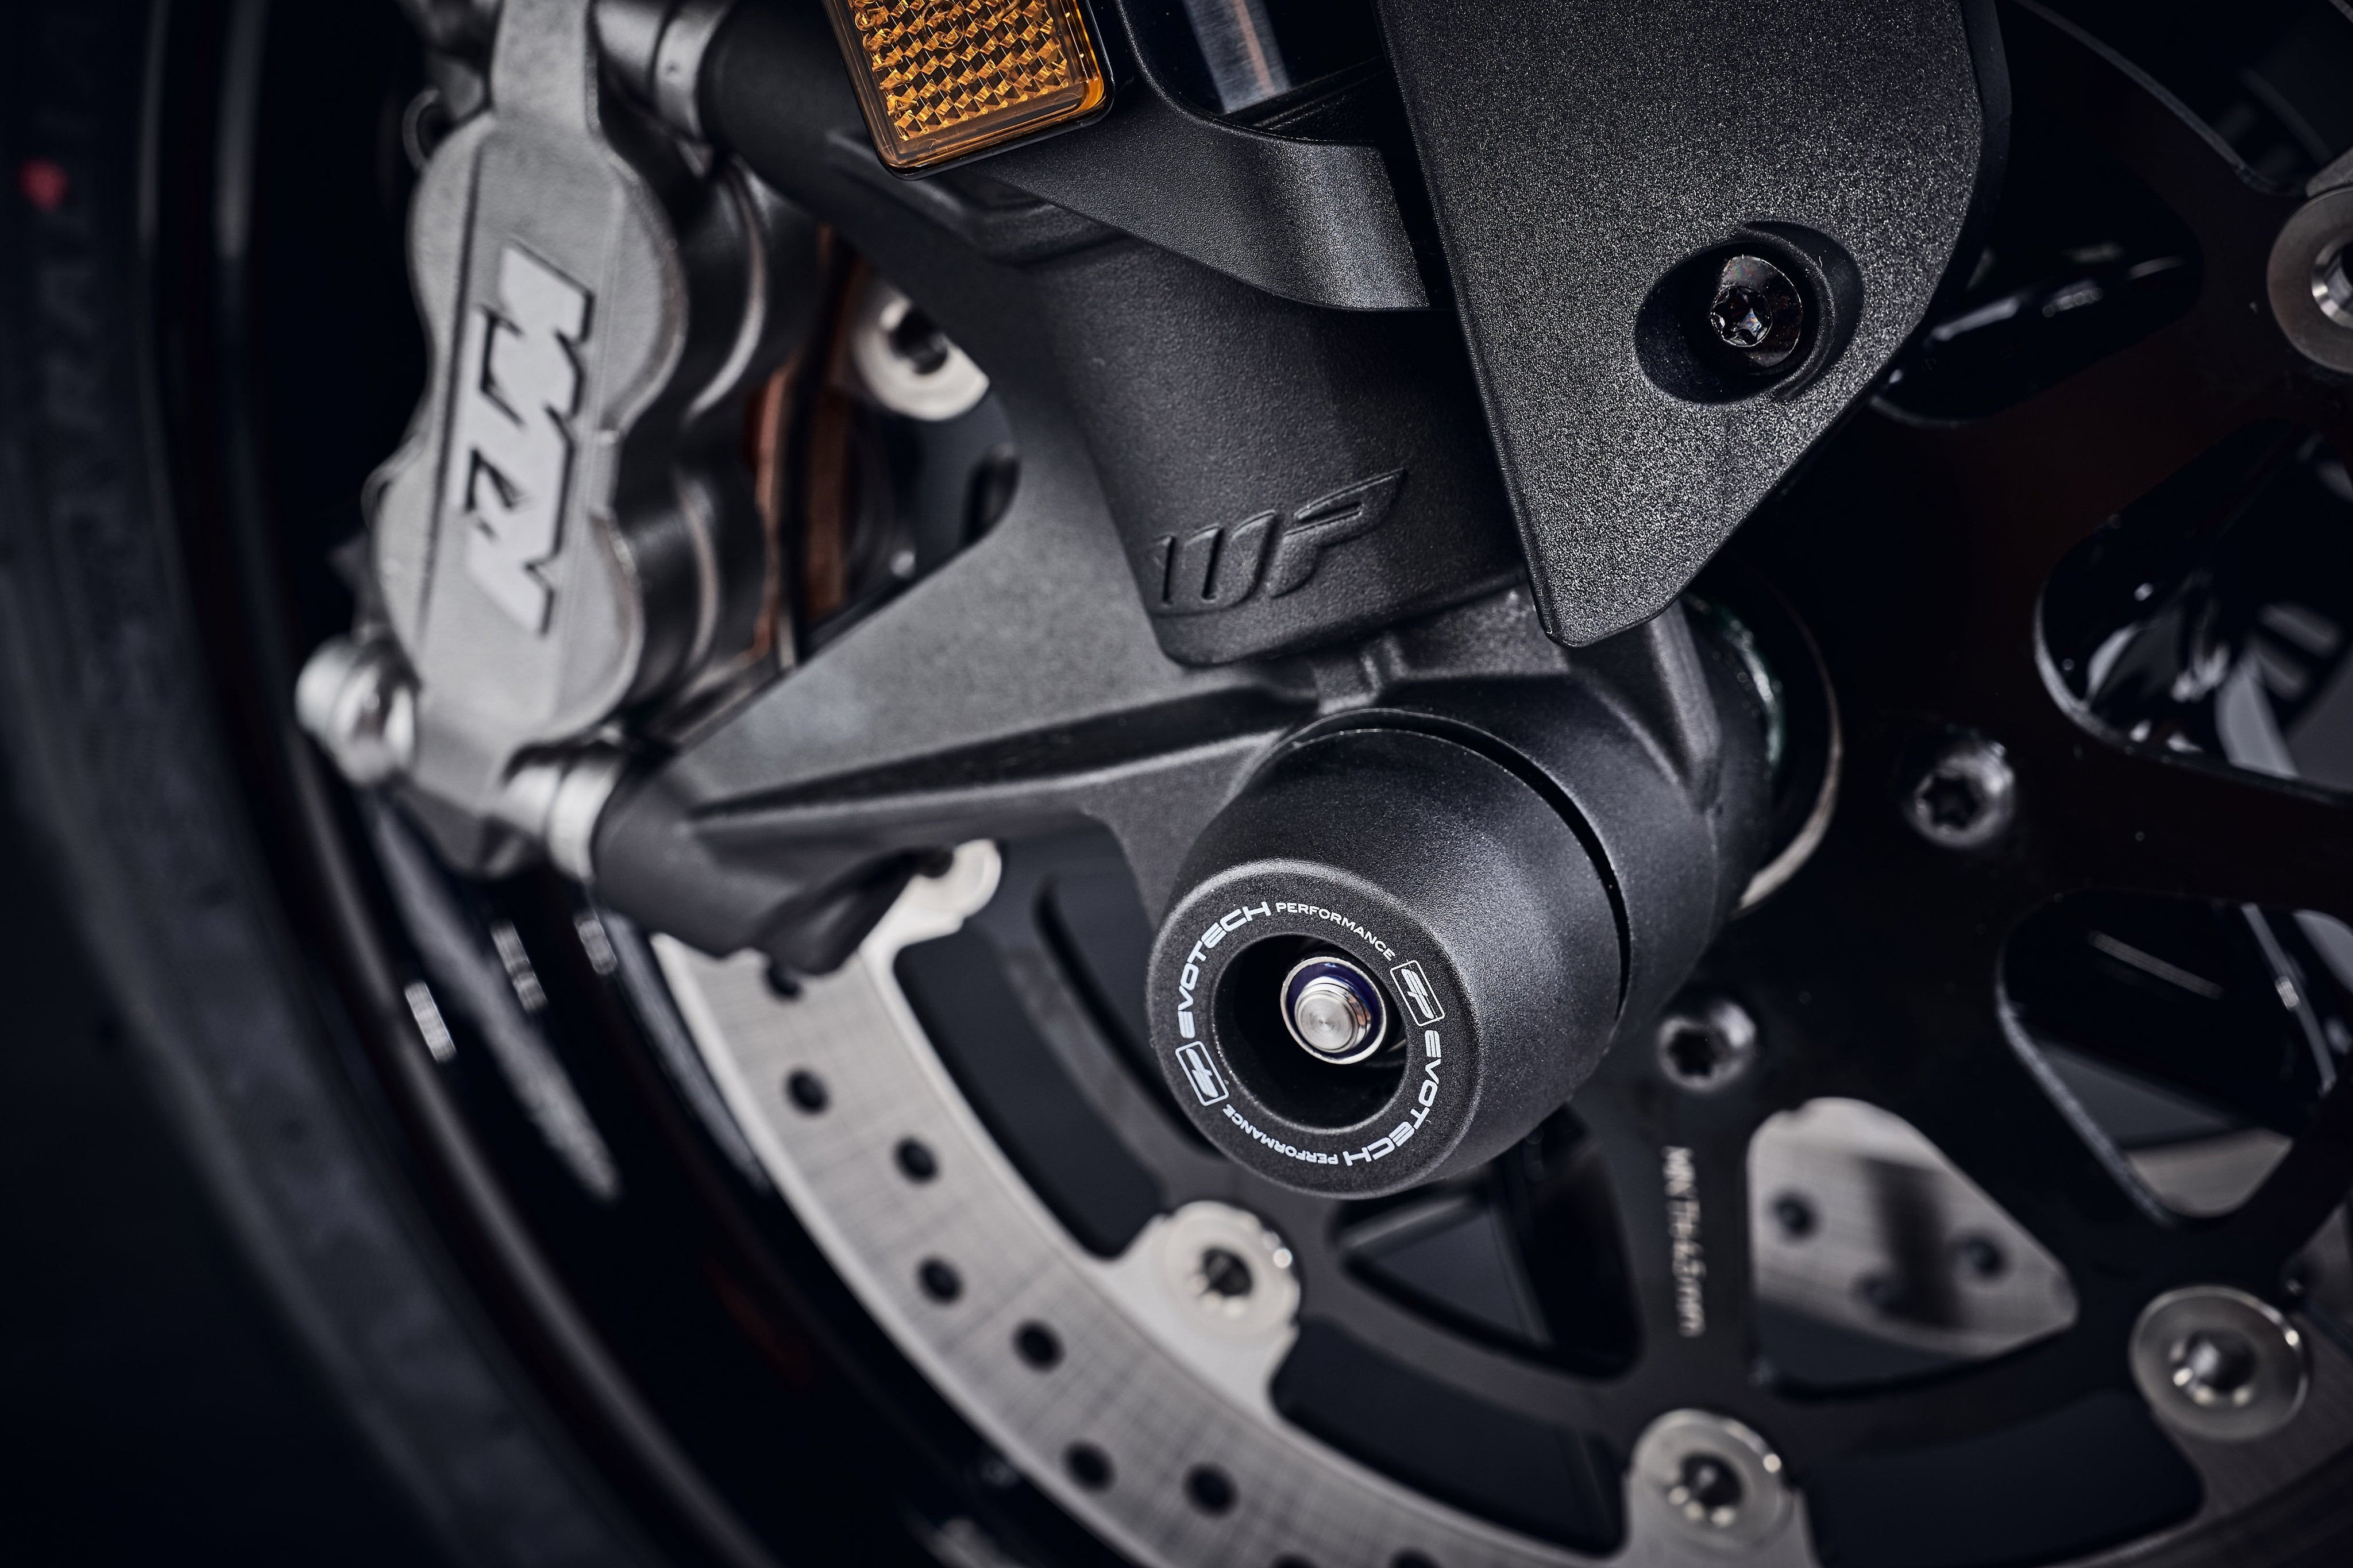 EP Front Spindle Bobbins fitted seamlessly to the KTM 890 Duke R, extending from the front forks for superior crash protection.